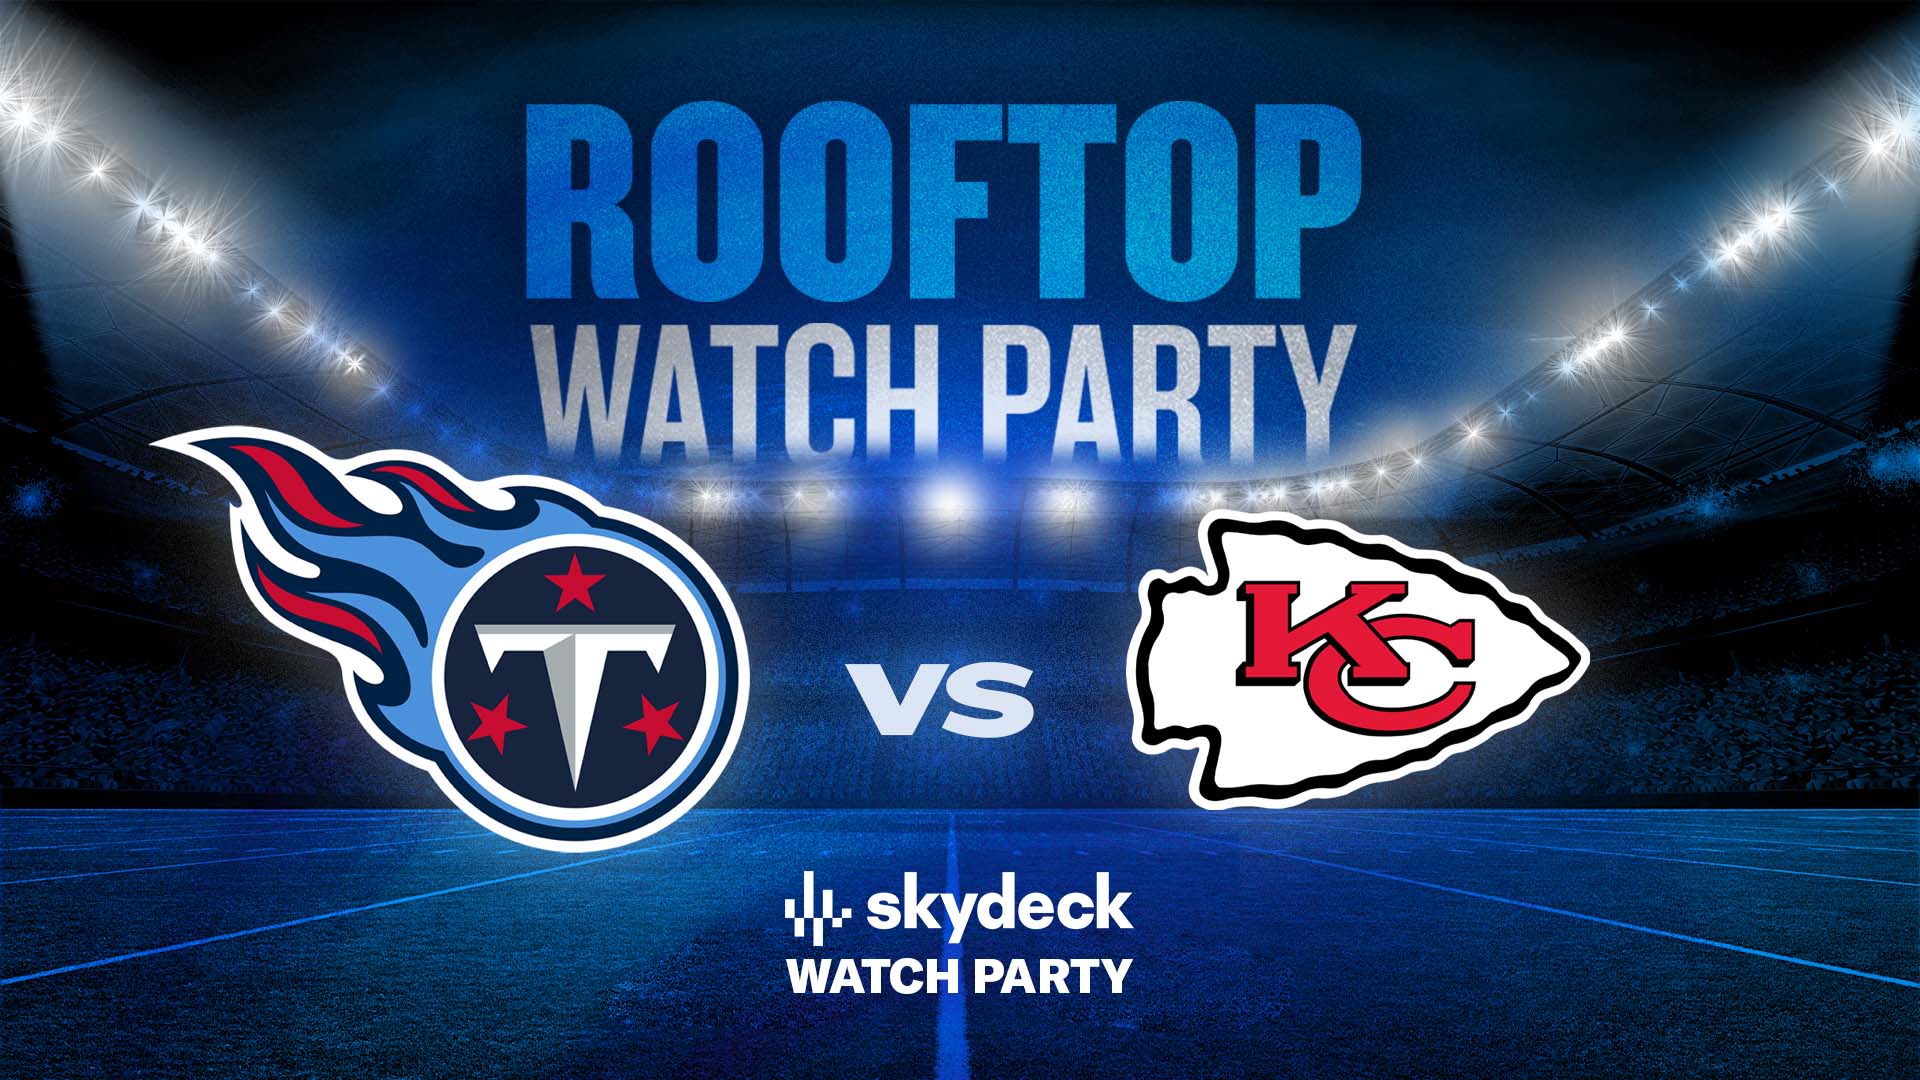 Promo image of Titans vs. Chiefs | Skydeck Watch Party